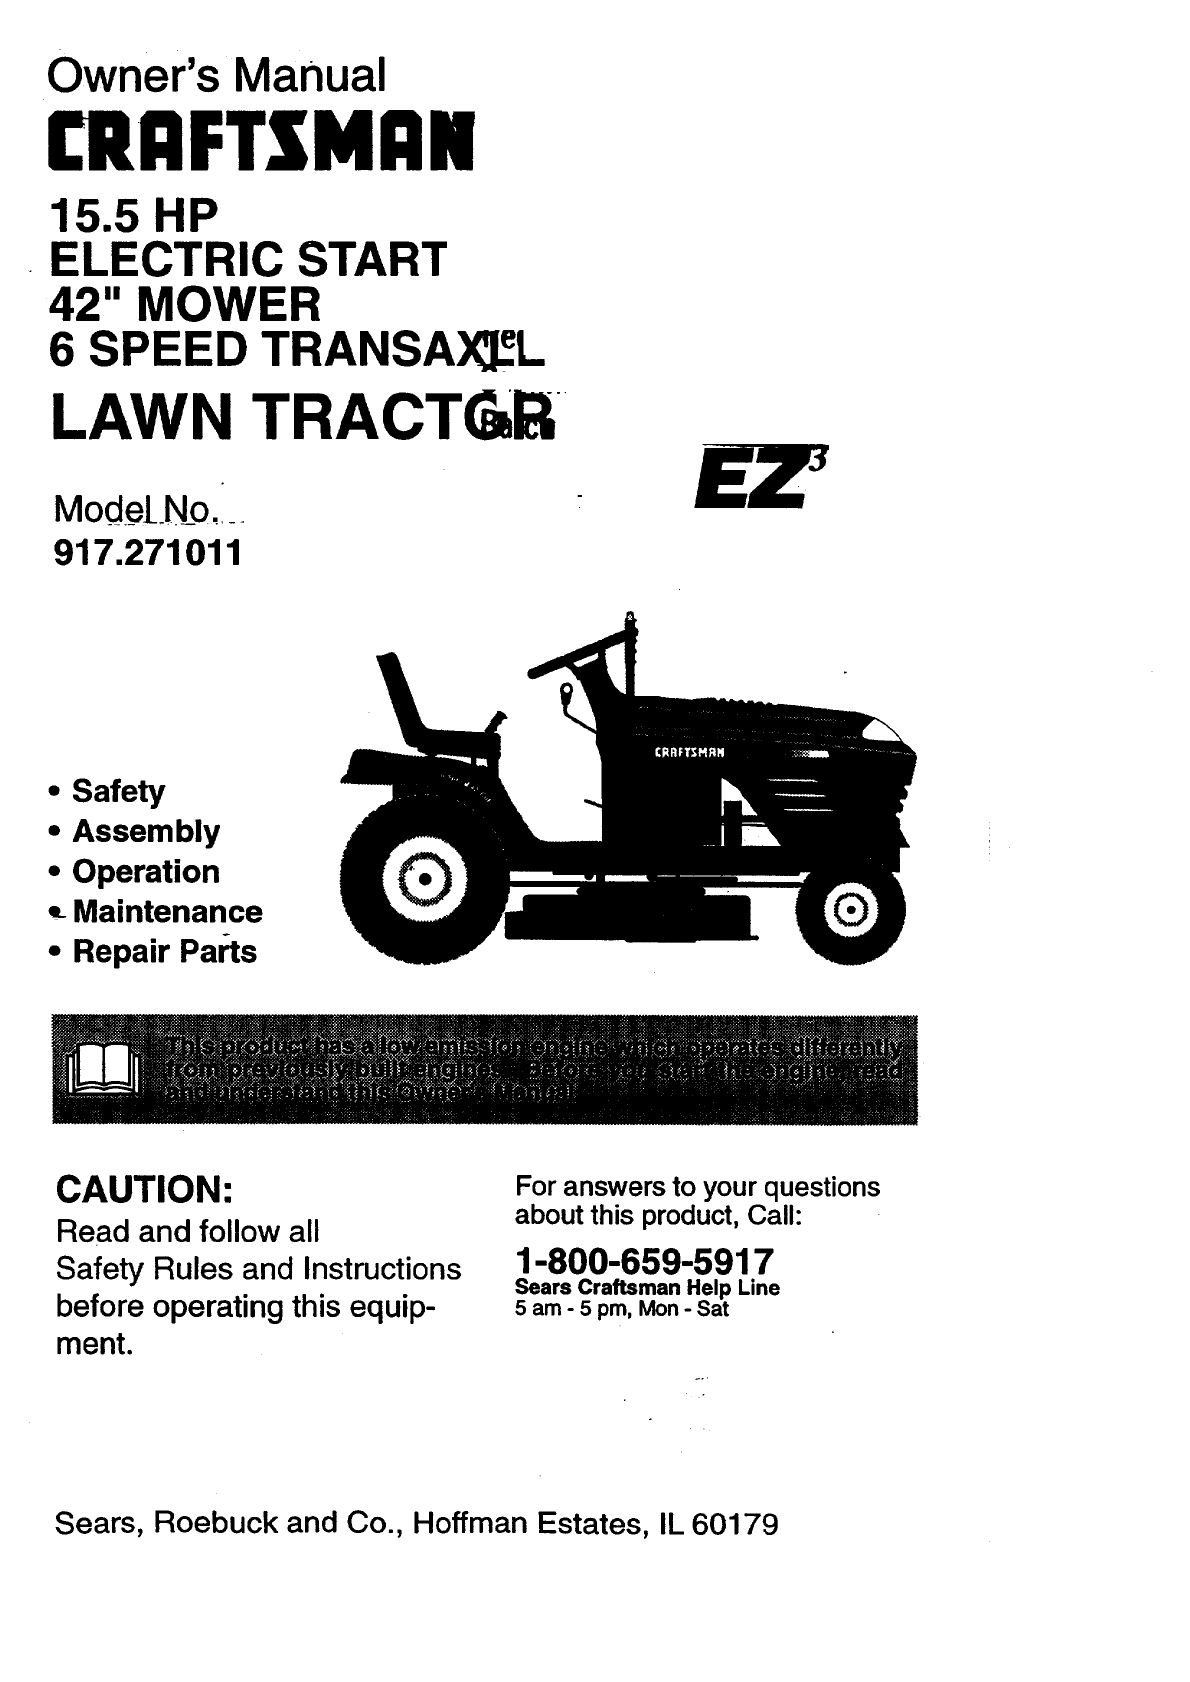 Craftsman 917271011 User Manual 15 5 Hp Electric Start 6 Speed Transaxle Lawn Trac Manuals And Guides 98080207